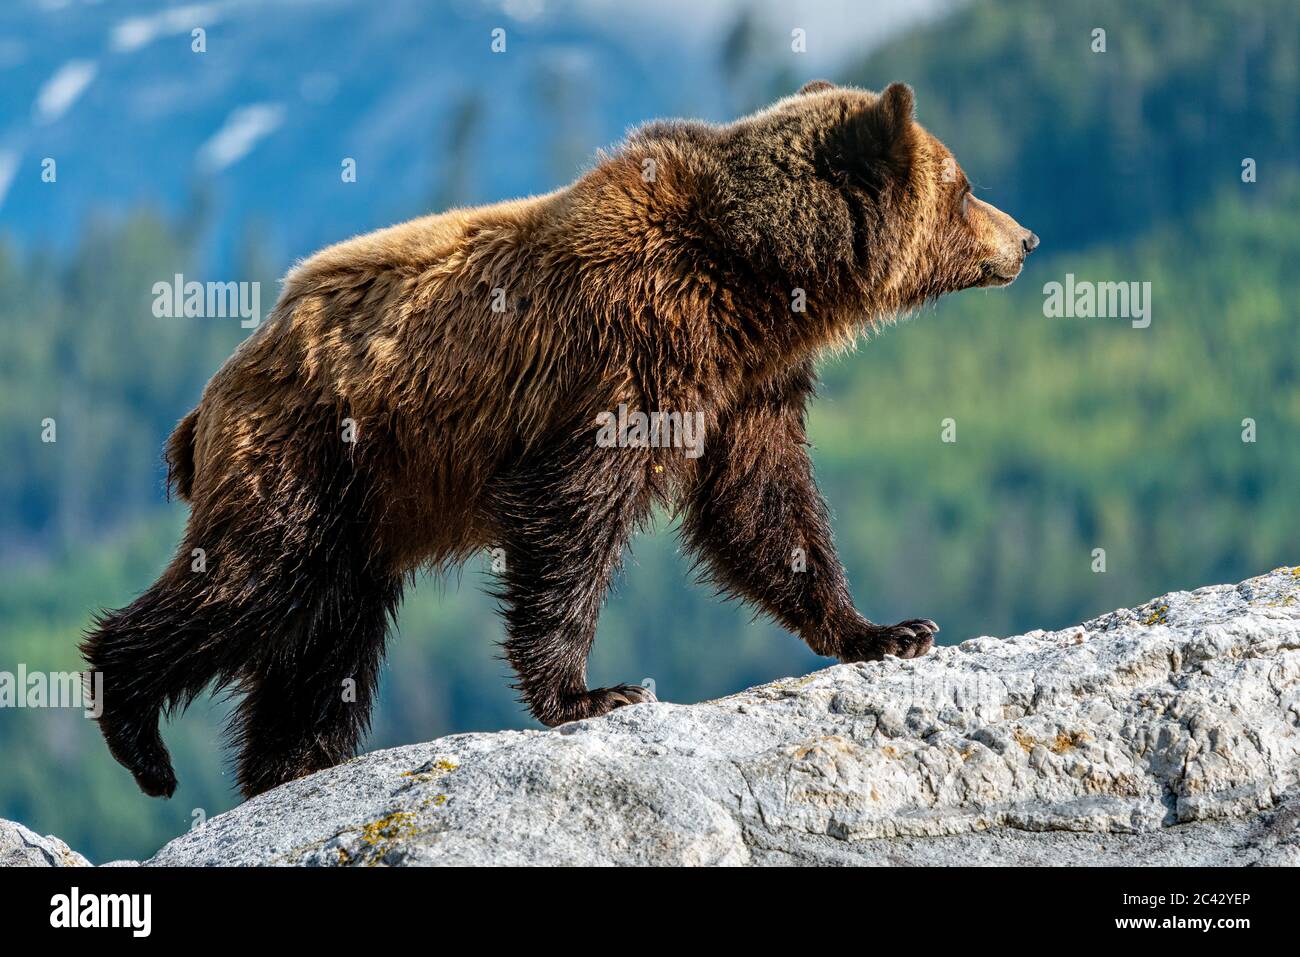 Grizzly bear walking along the beautiful scenery of Knight Inlet, First Nations Territory, British Columbia, Canada. Stock Photo